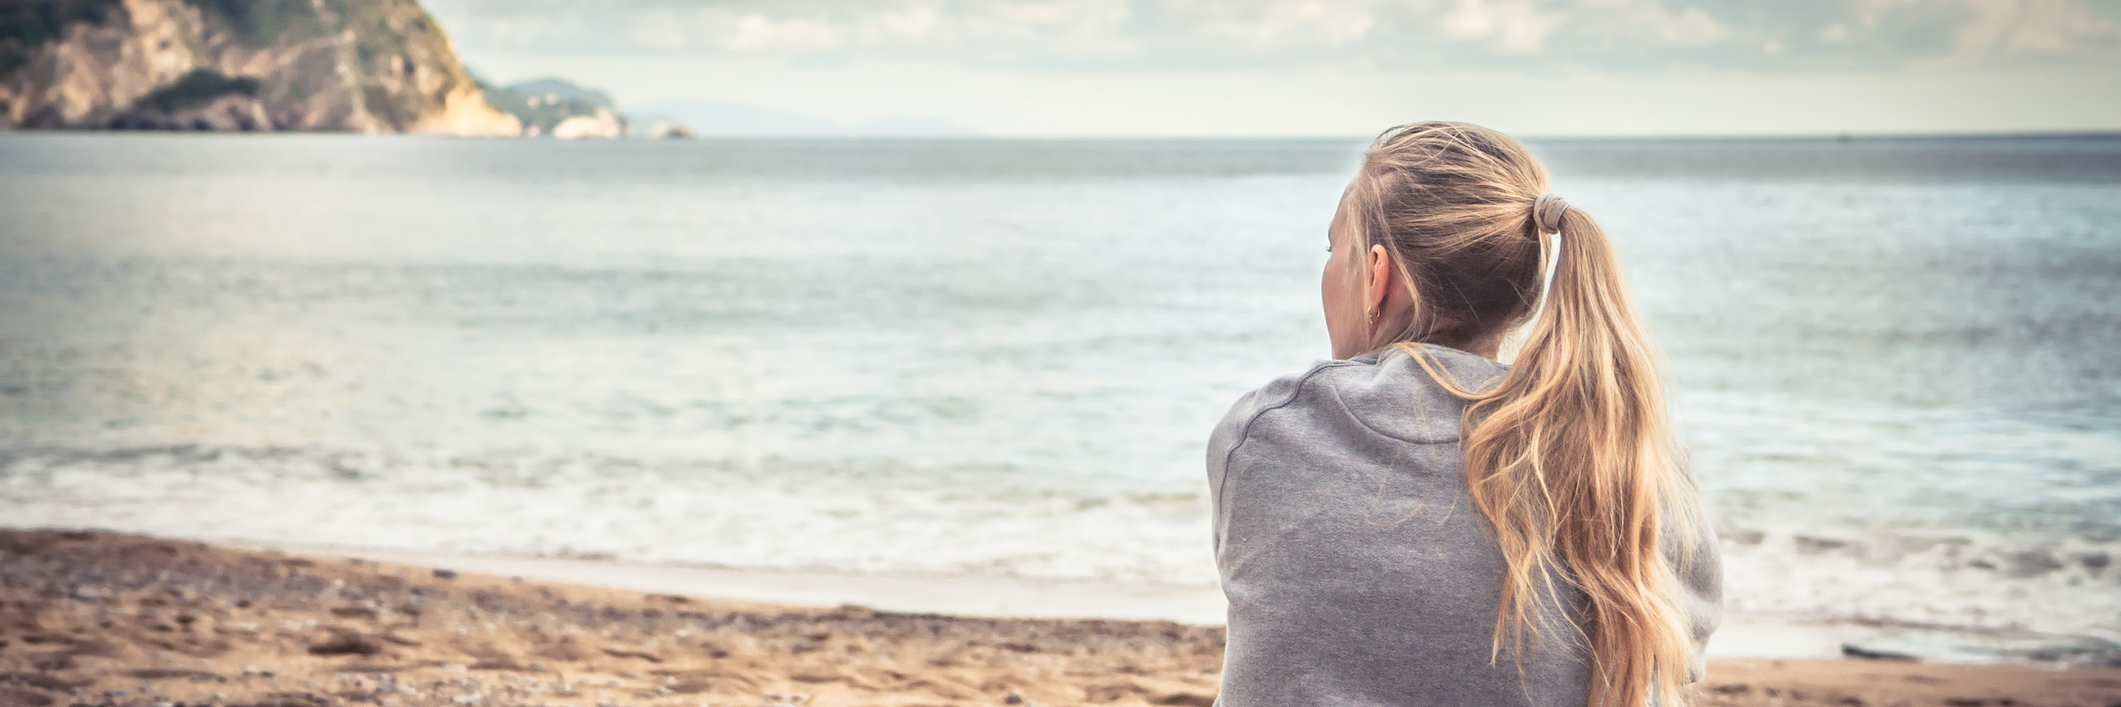 Pensive woman sitting on beach hugging her knees and looking into the distance with hope.